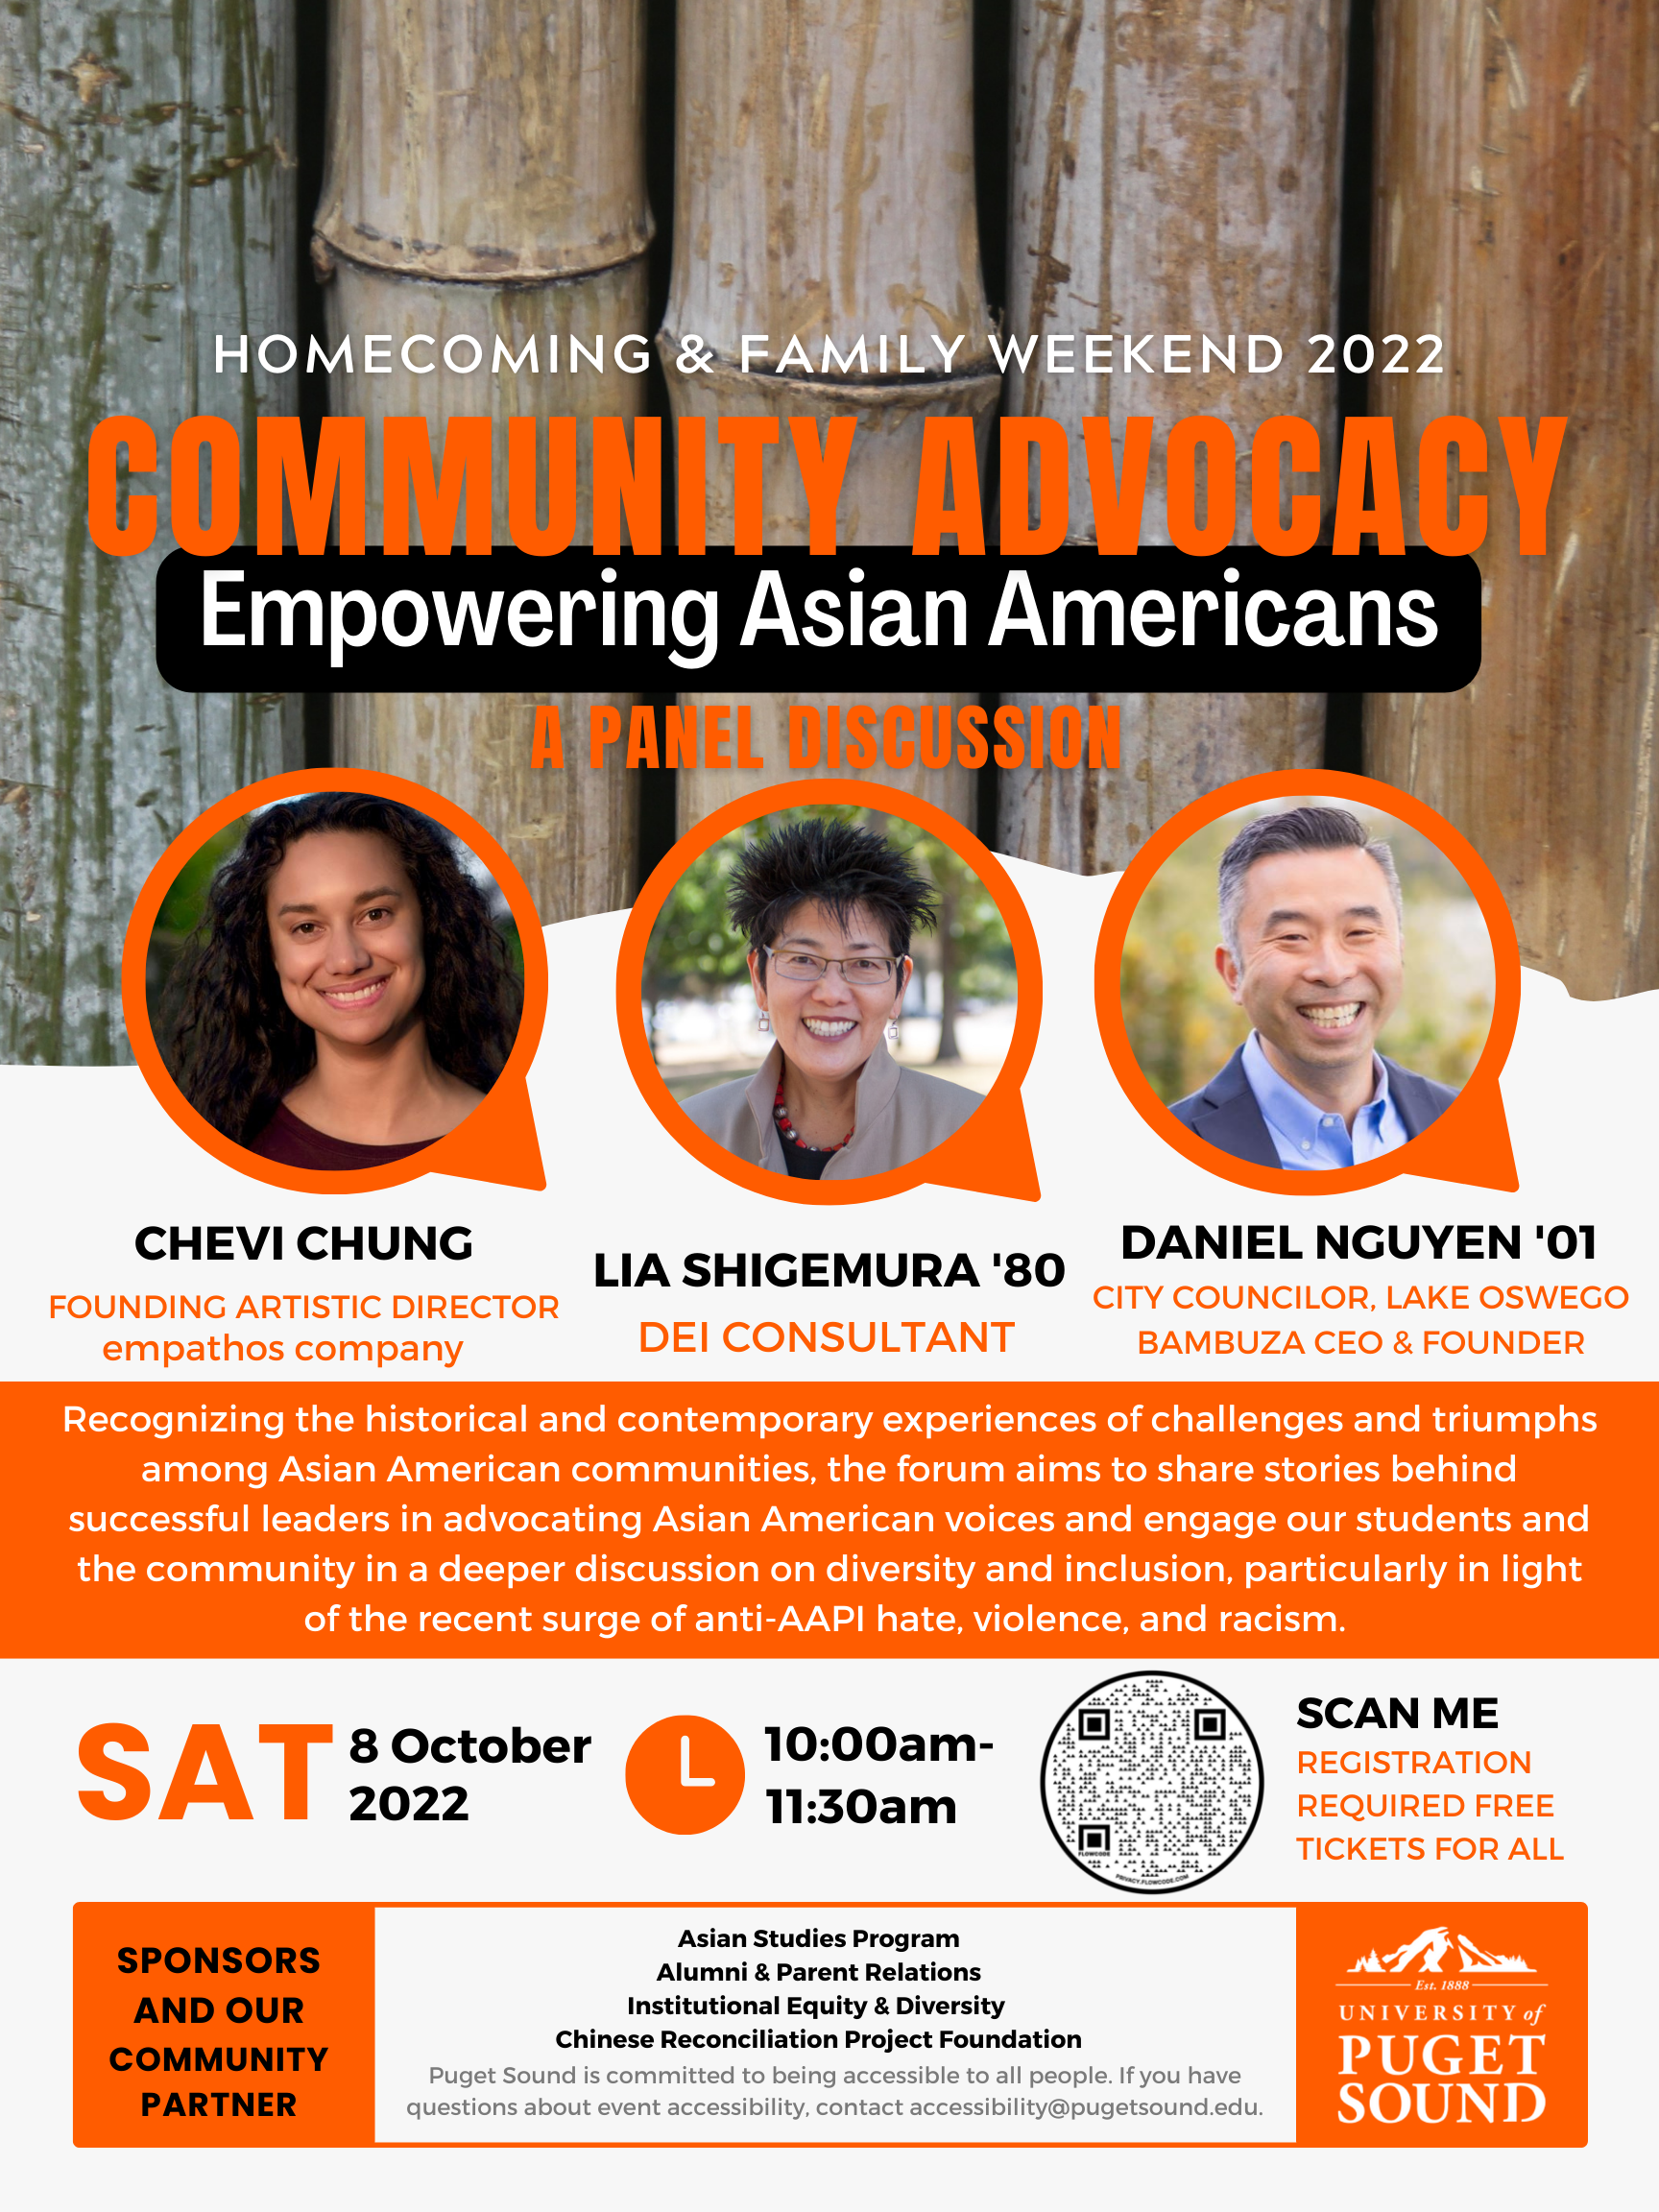 Empowering Asian Americans event poster